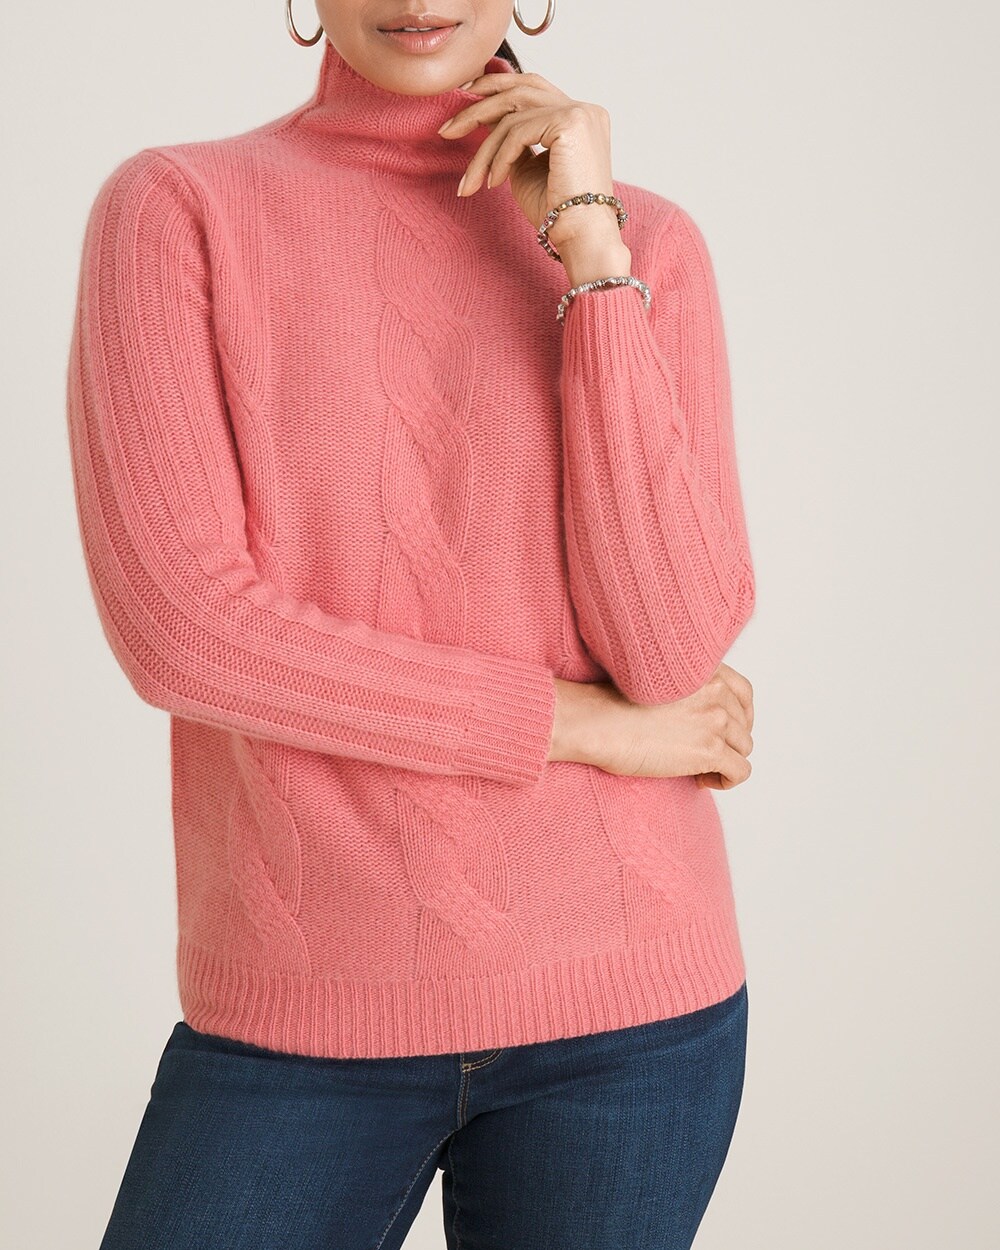 Cashmere Cable Sweater